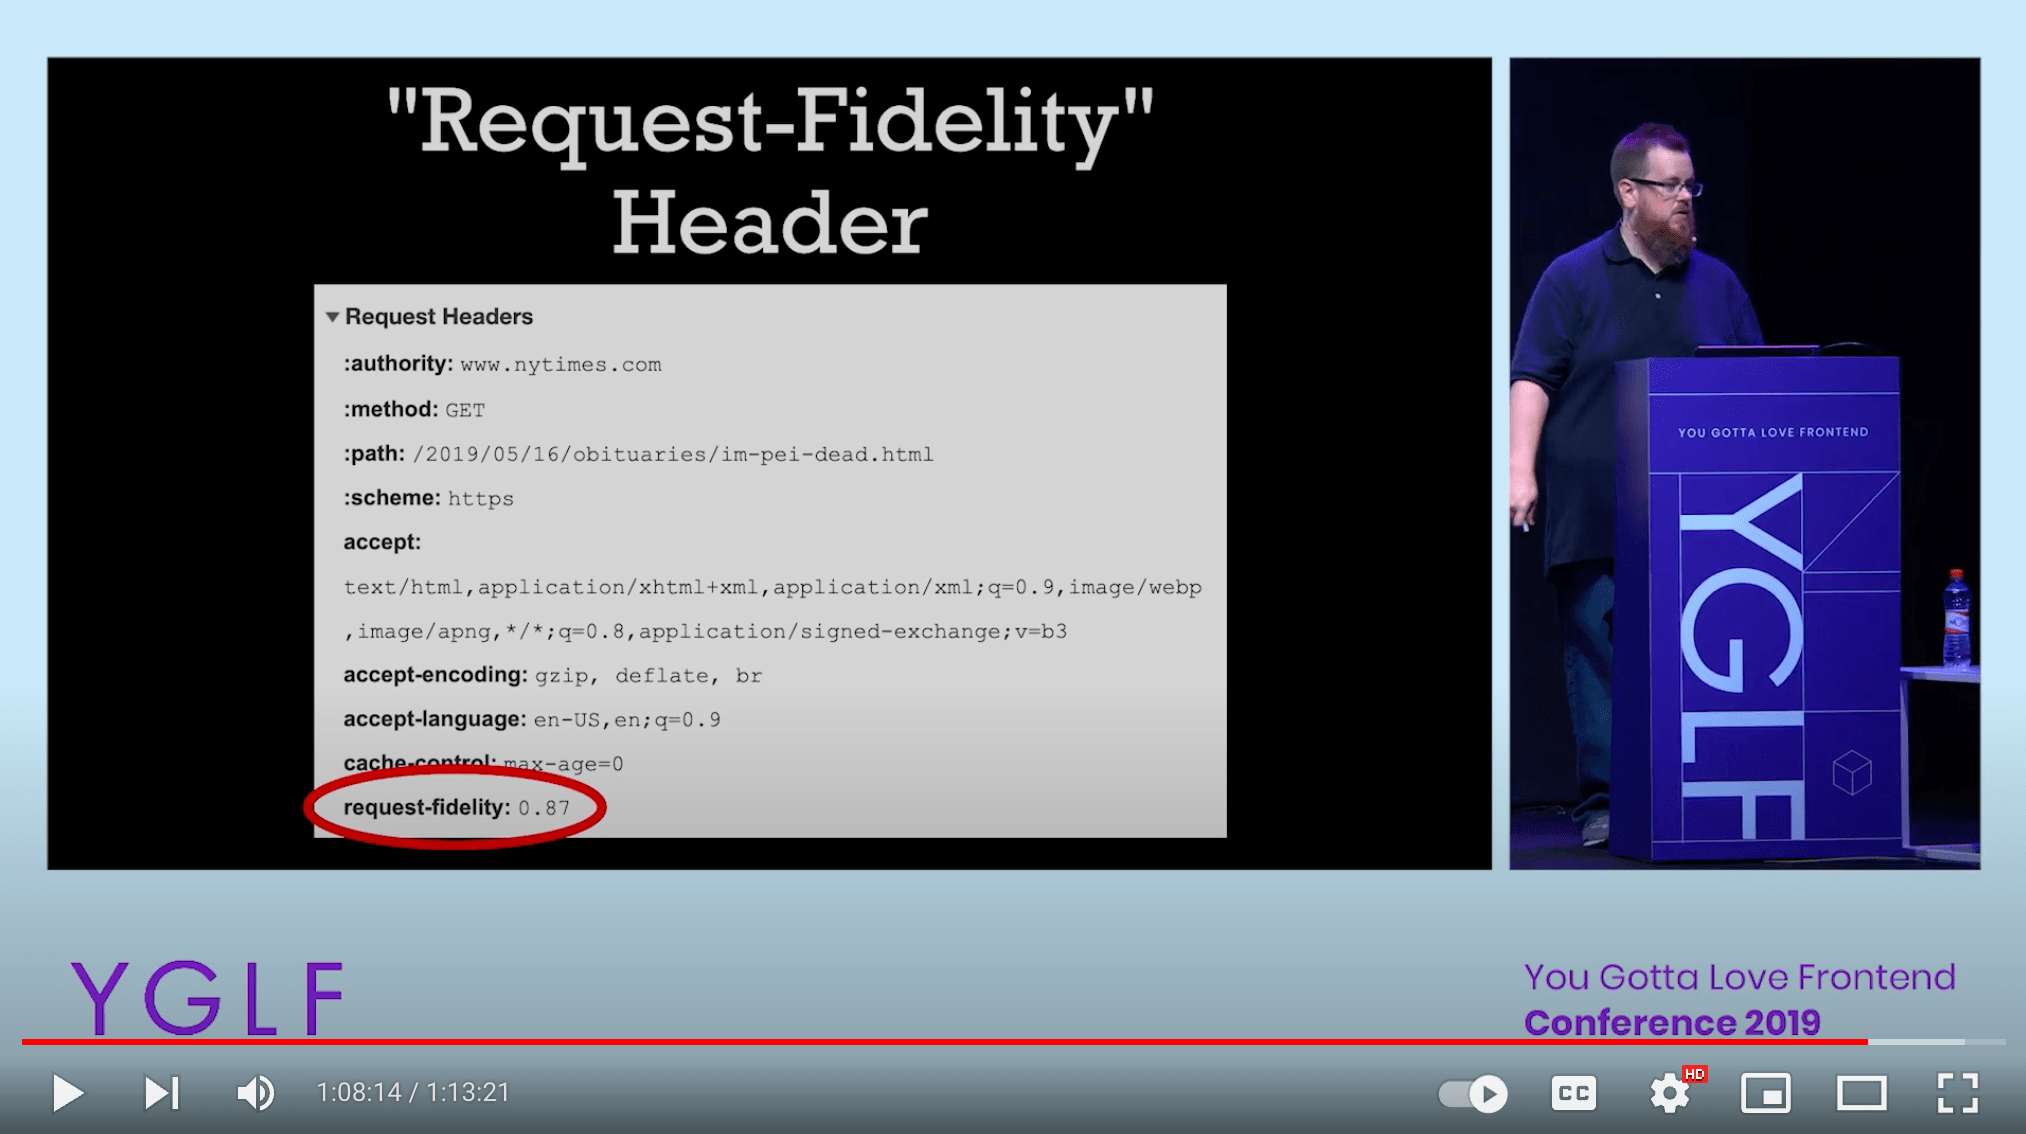 Screenshot from the YGLF conference recording showing Kyle Simpson on stage with a slide showing a theoretical “request-fidelity” header highlighted in the developer tools.